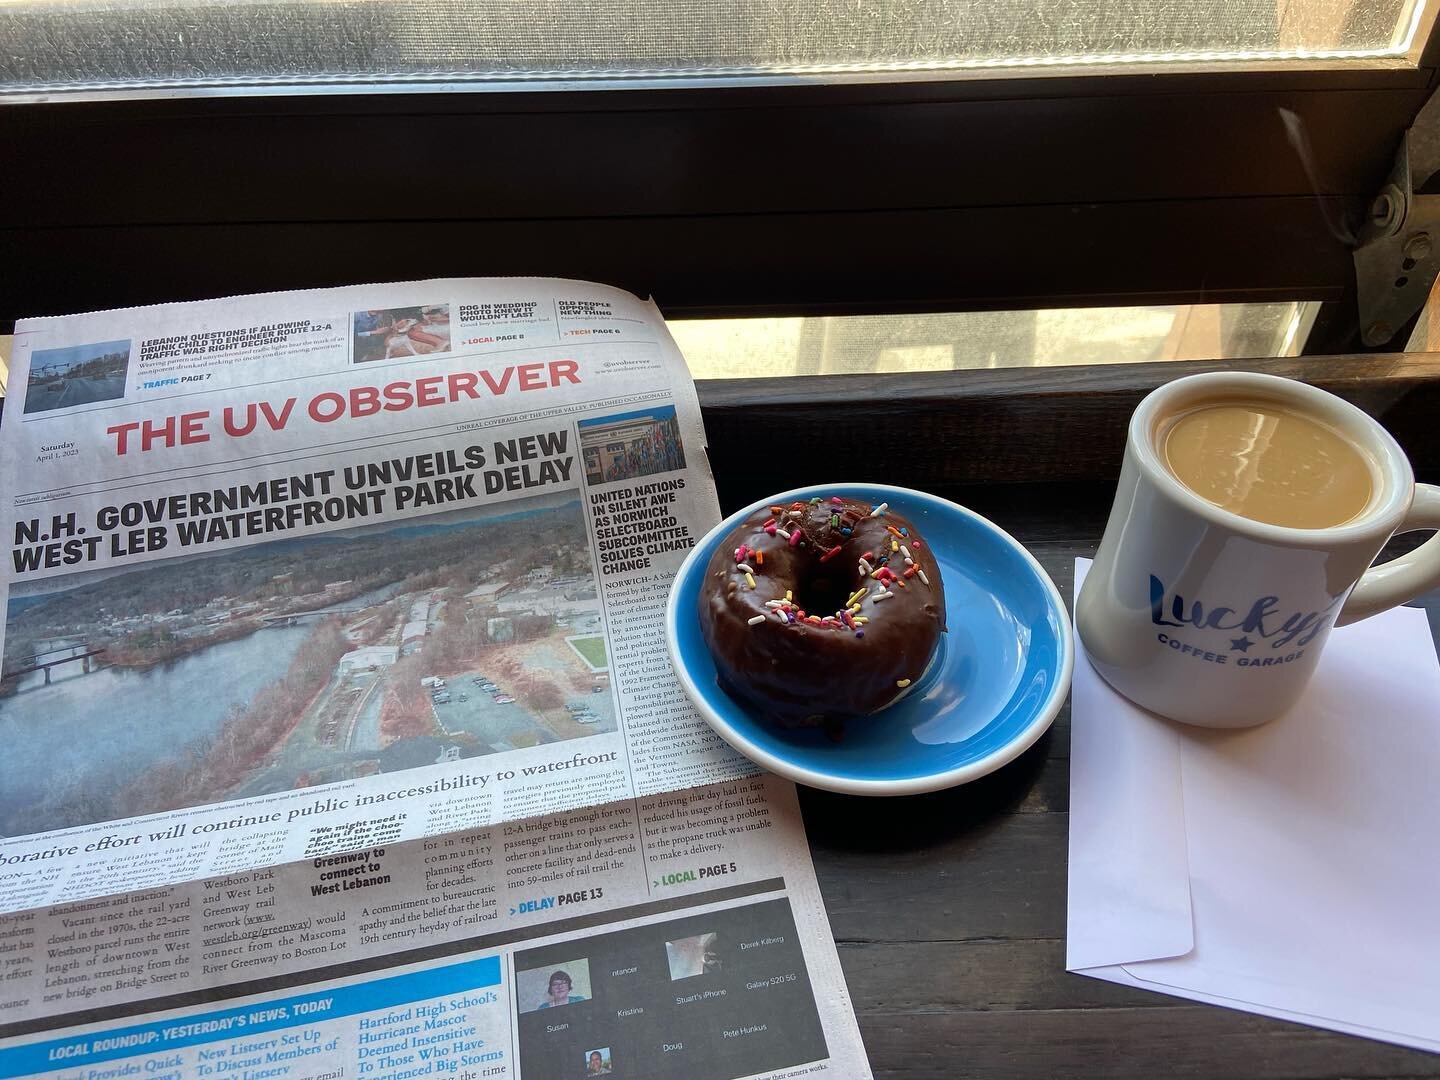 Things that brought me joy, laughter and connection today:
1. Reading the @uvobserver - I was literally laughing out loud to myself
2. Ordering a @jumbo.honey.bun.bakes donut and americano from @luckyscoffeegarage (and Rae opened the garage door whic